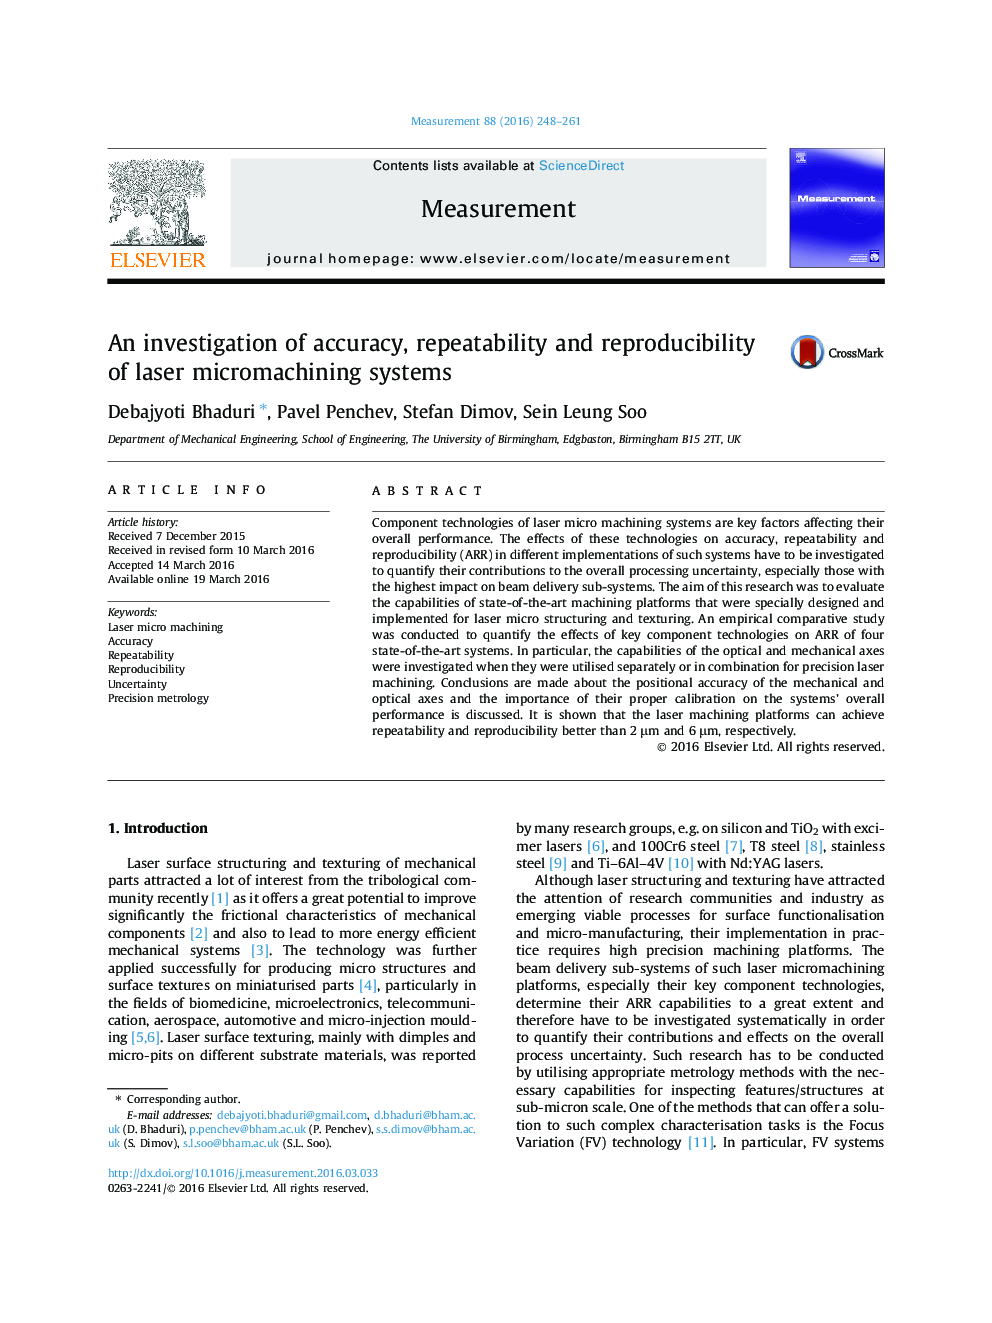 An investigation of accuracy, repeatability and reproducibility of laser micromachining systems